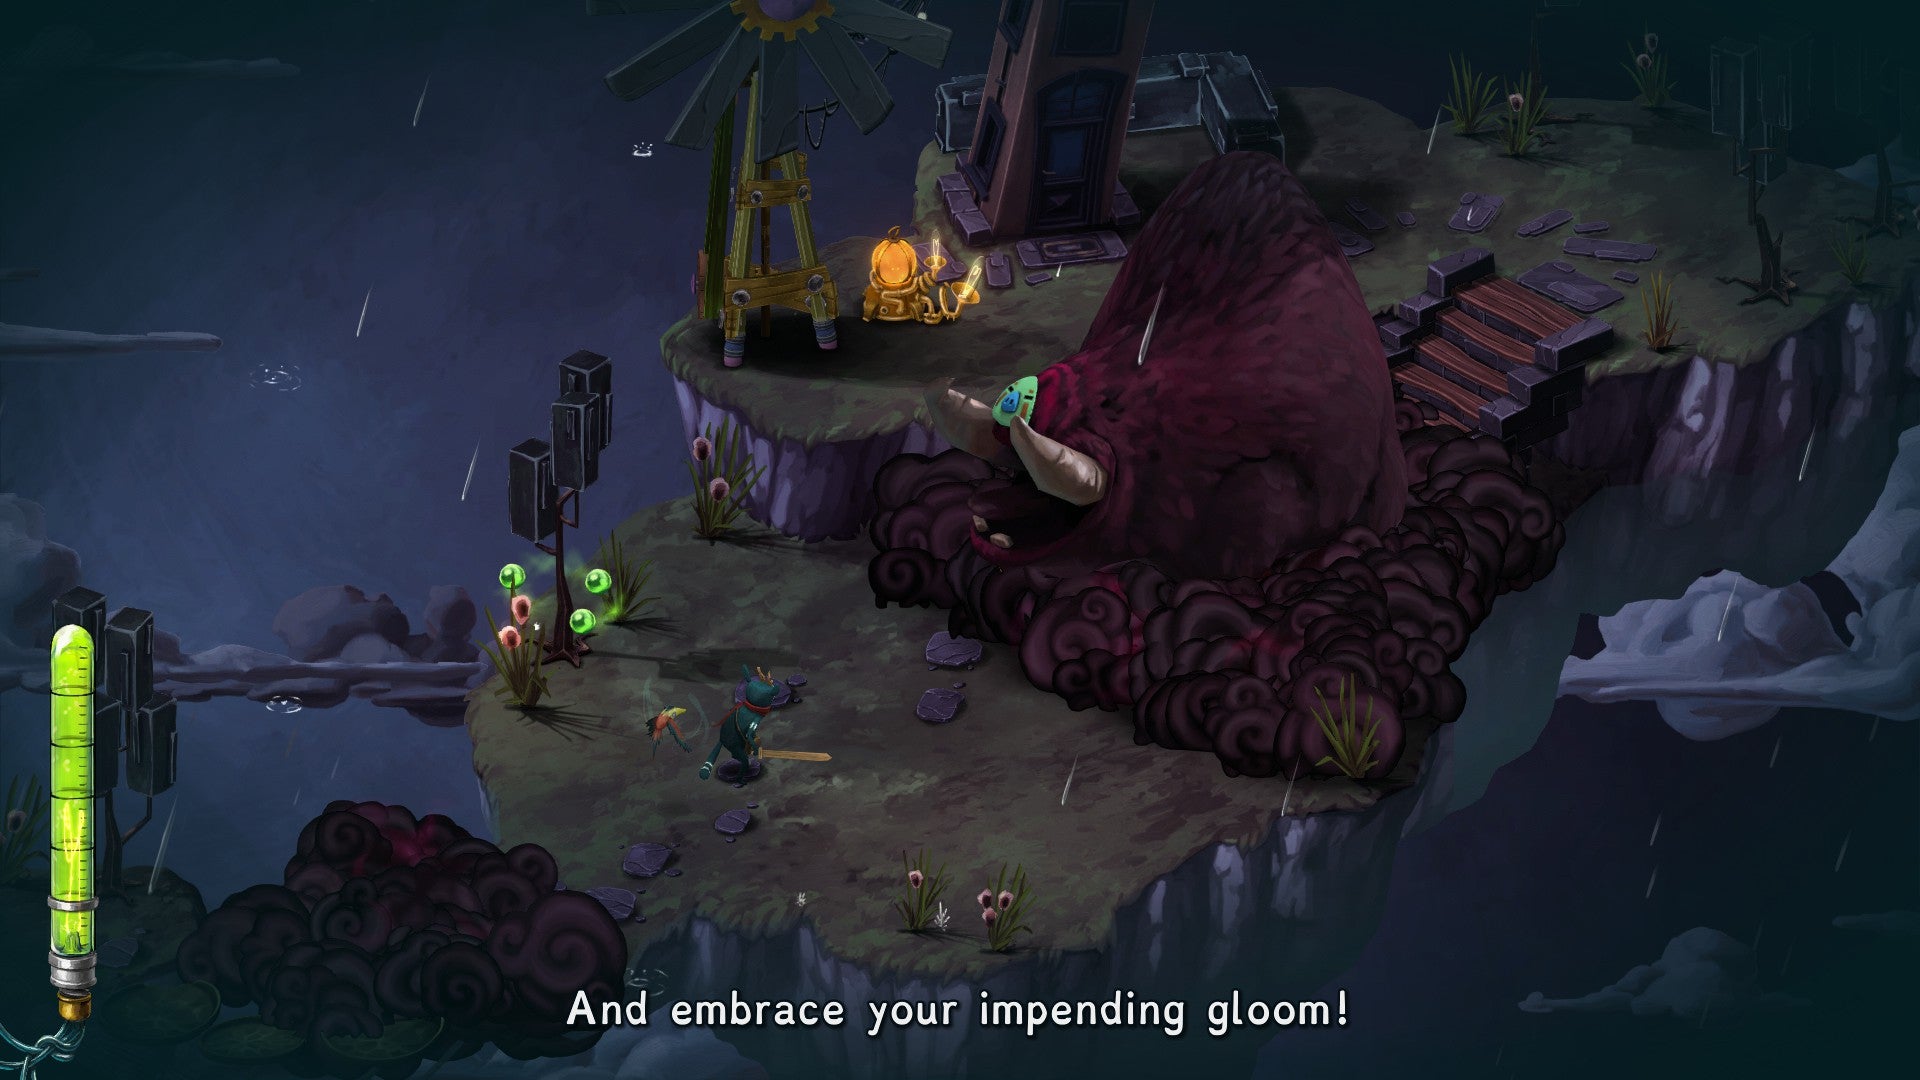 A Figment 2 screenshot showing Dusty and Piper face off against a giant nightmare in the shape of a bull